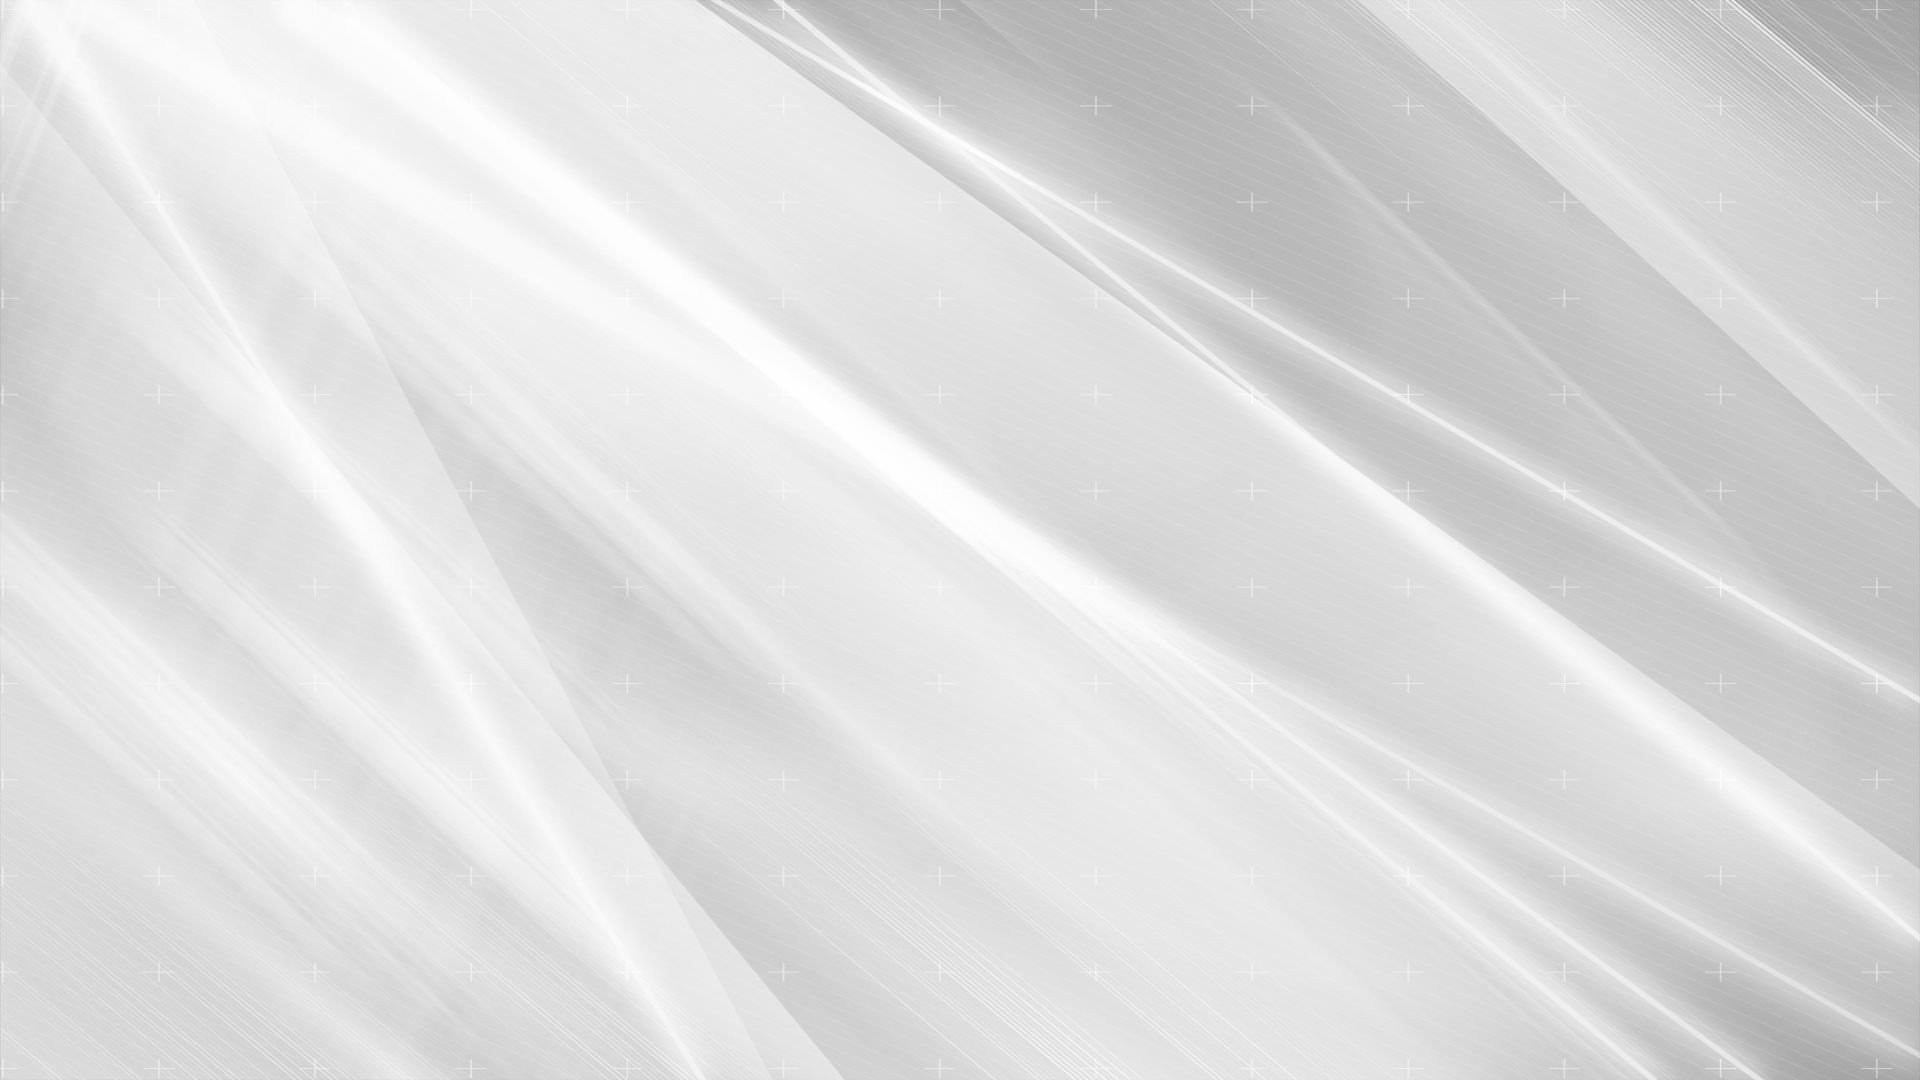 Attachment white abstract 75 wallpaper background hd